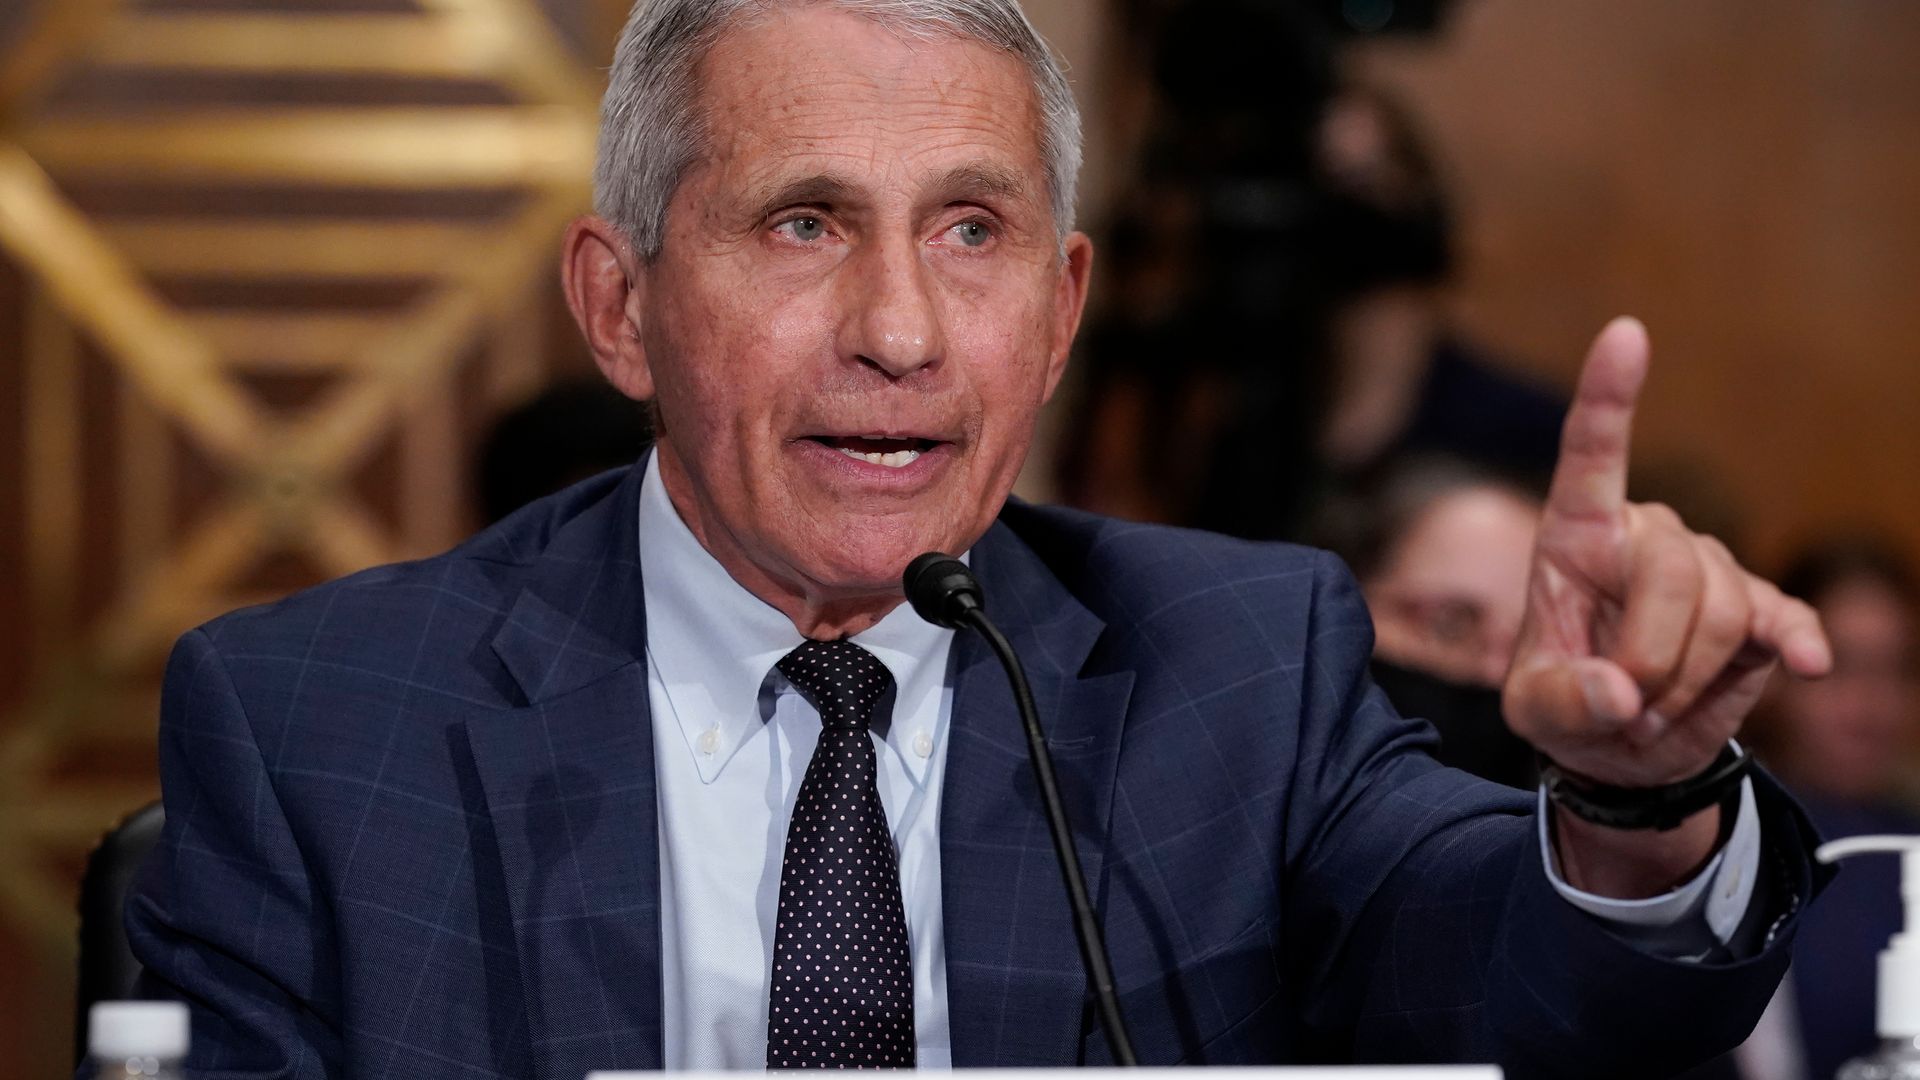 Dr. Anthony Fauci stated that Rep. Marjorie Taylor Greene's criticisms during a COVID-19 hearing led to an increase in death threats against him.